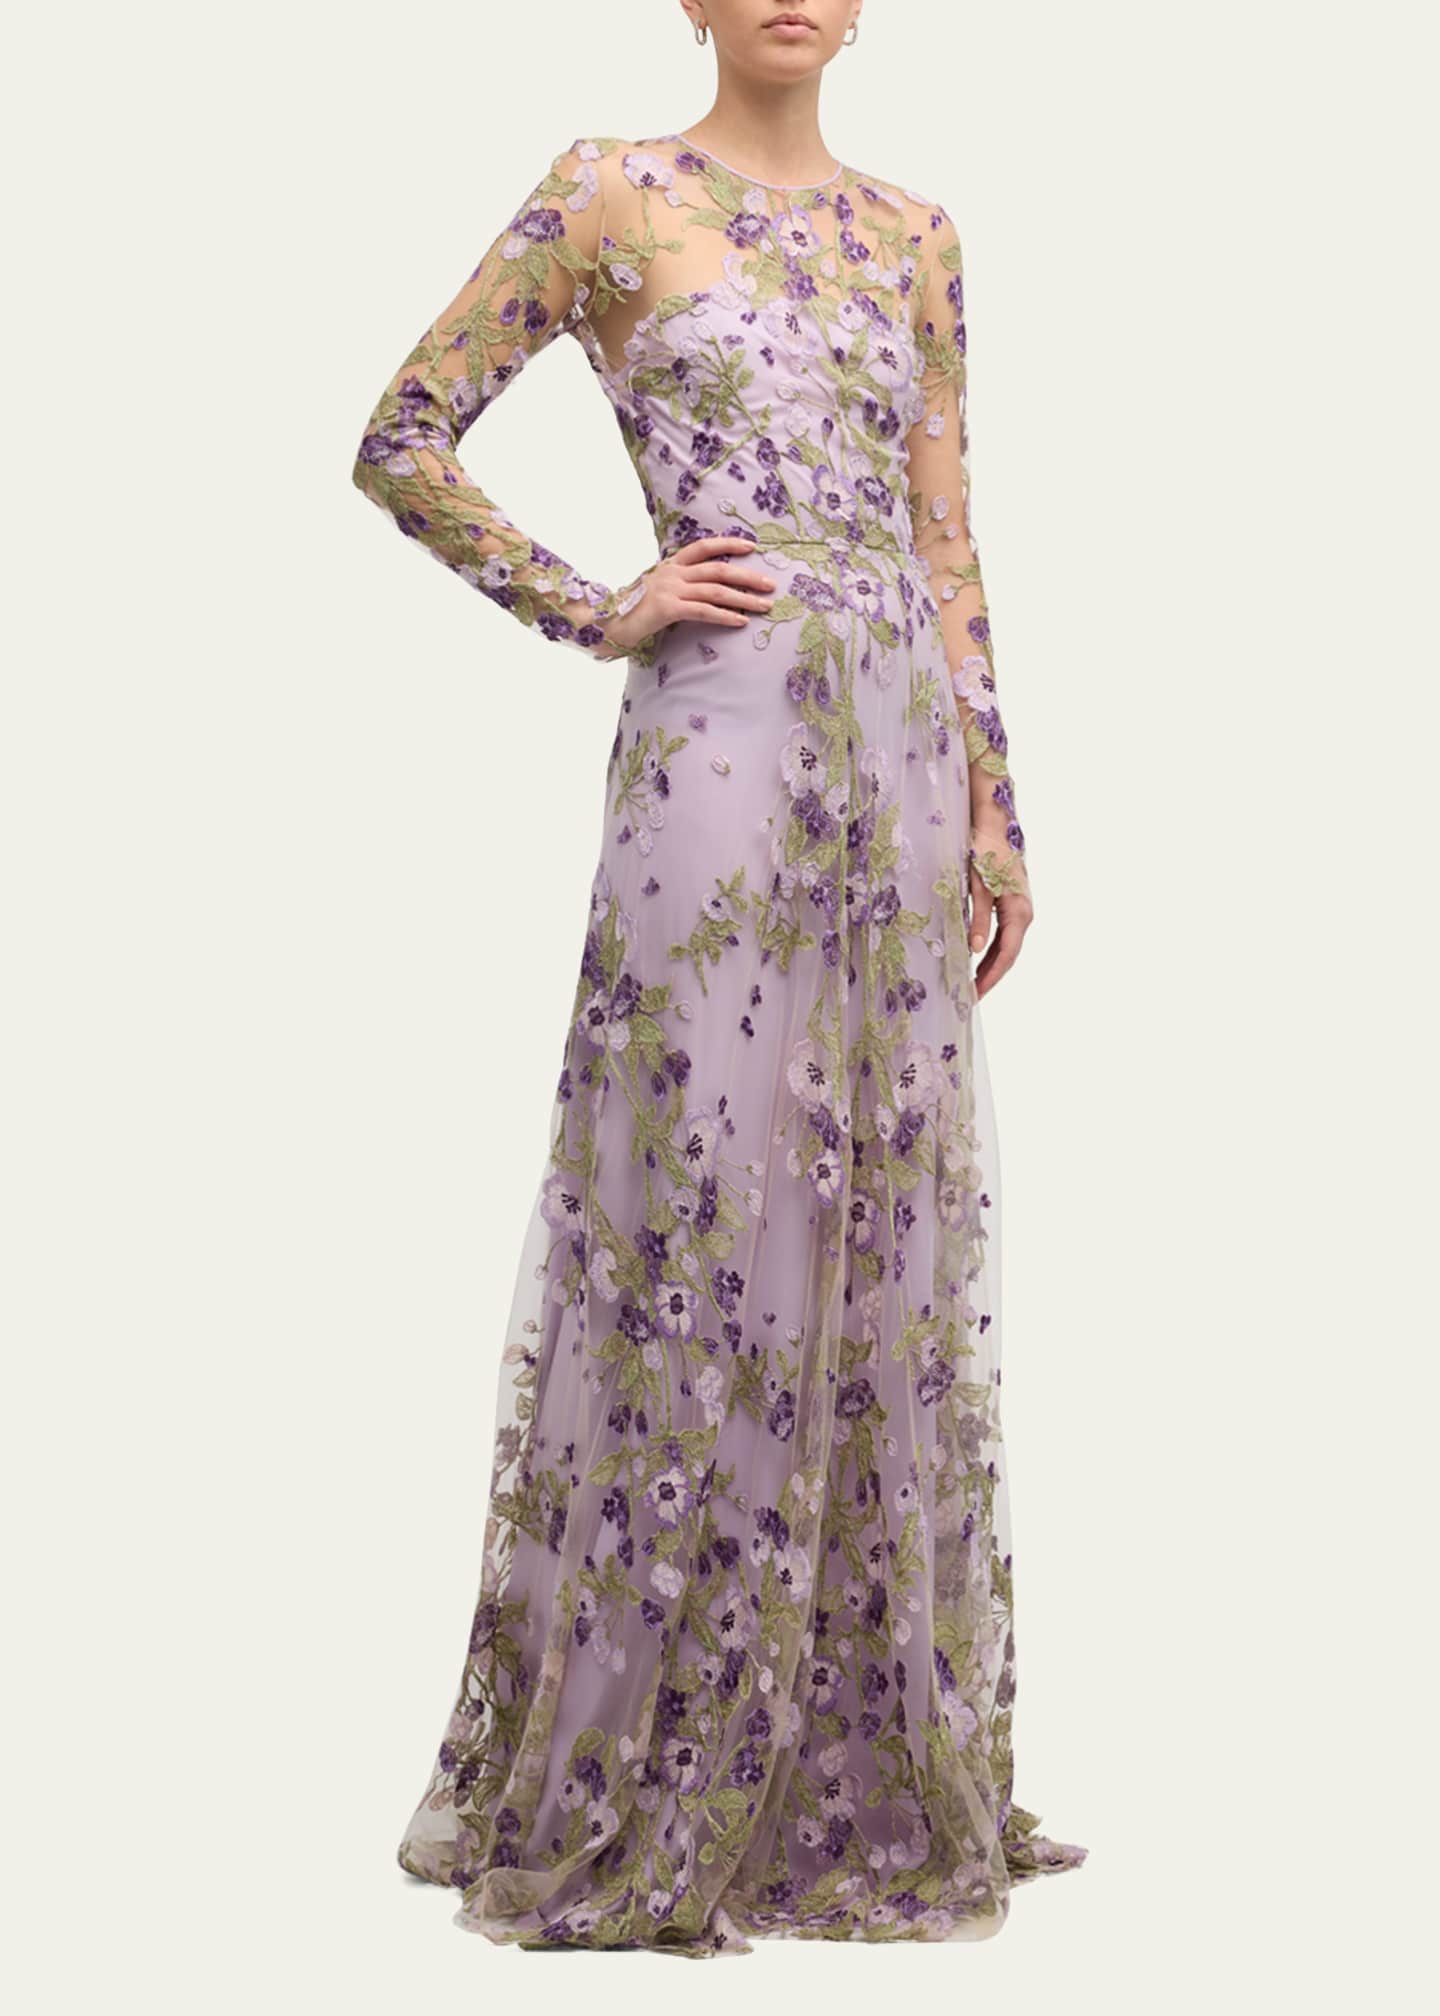 Naeem Khan Embroidered Floral Gown with Sheer Overlay - Bergdorf Goodman